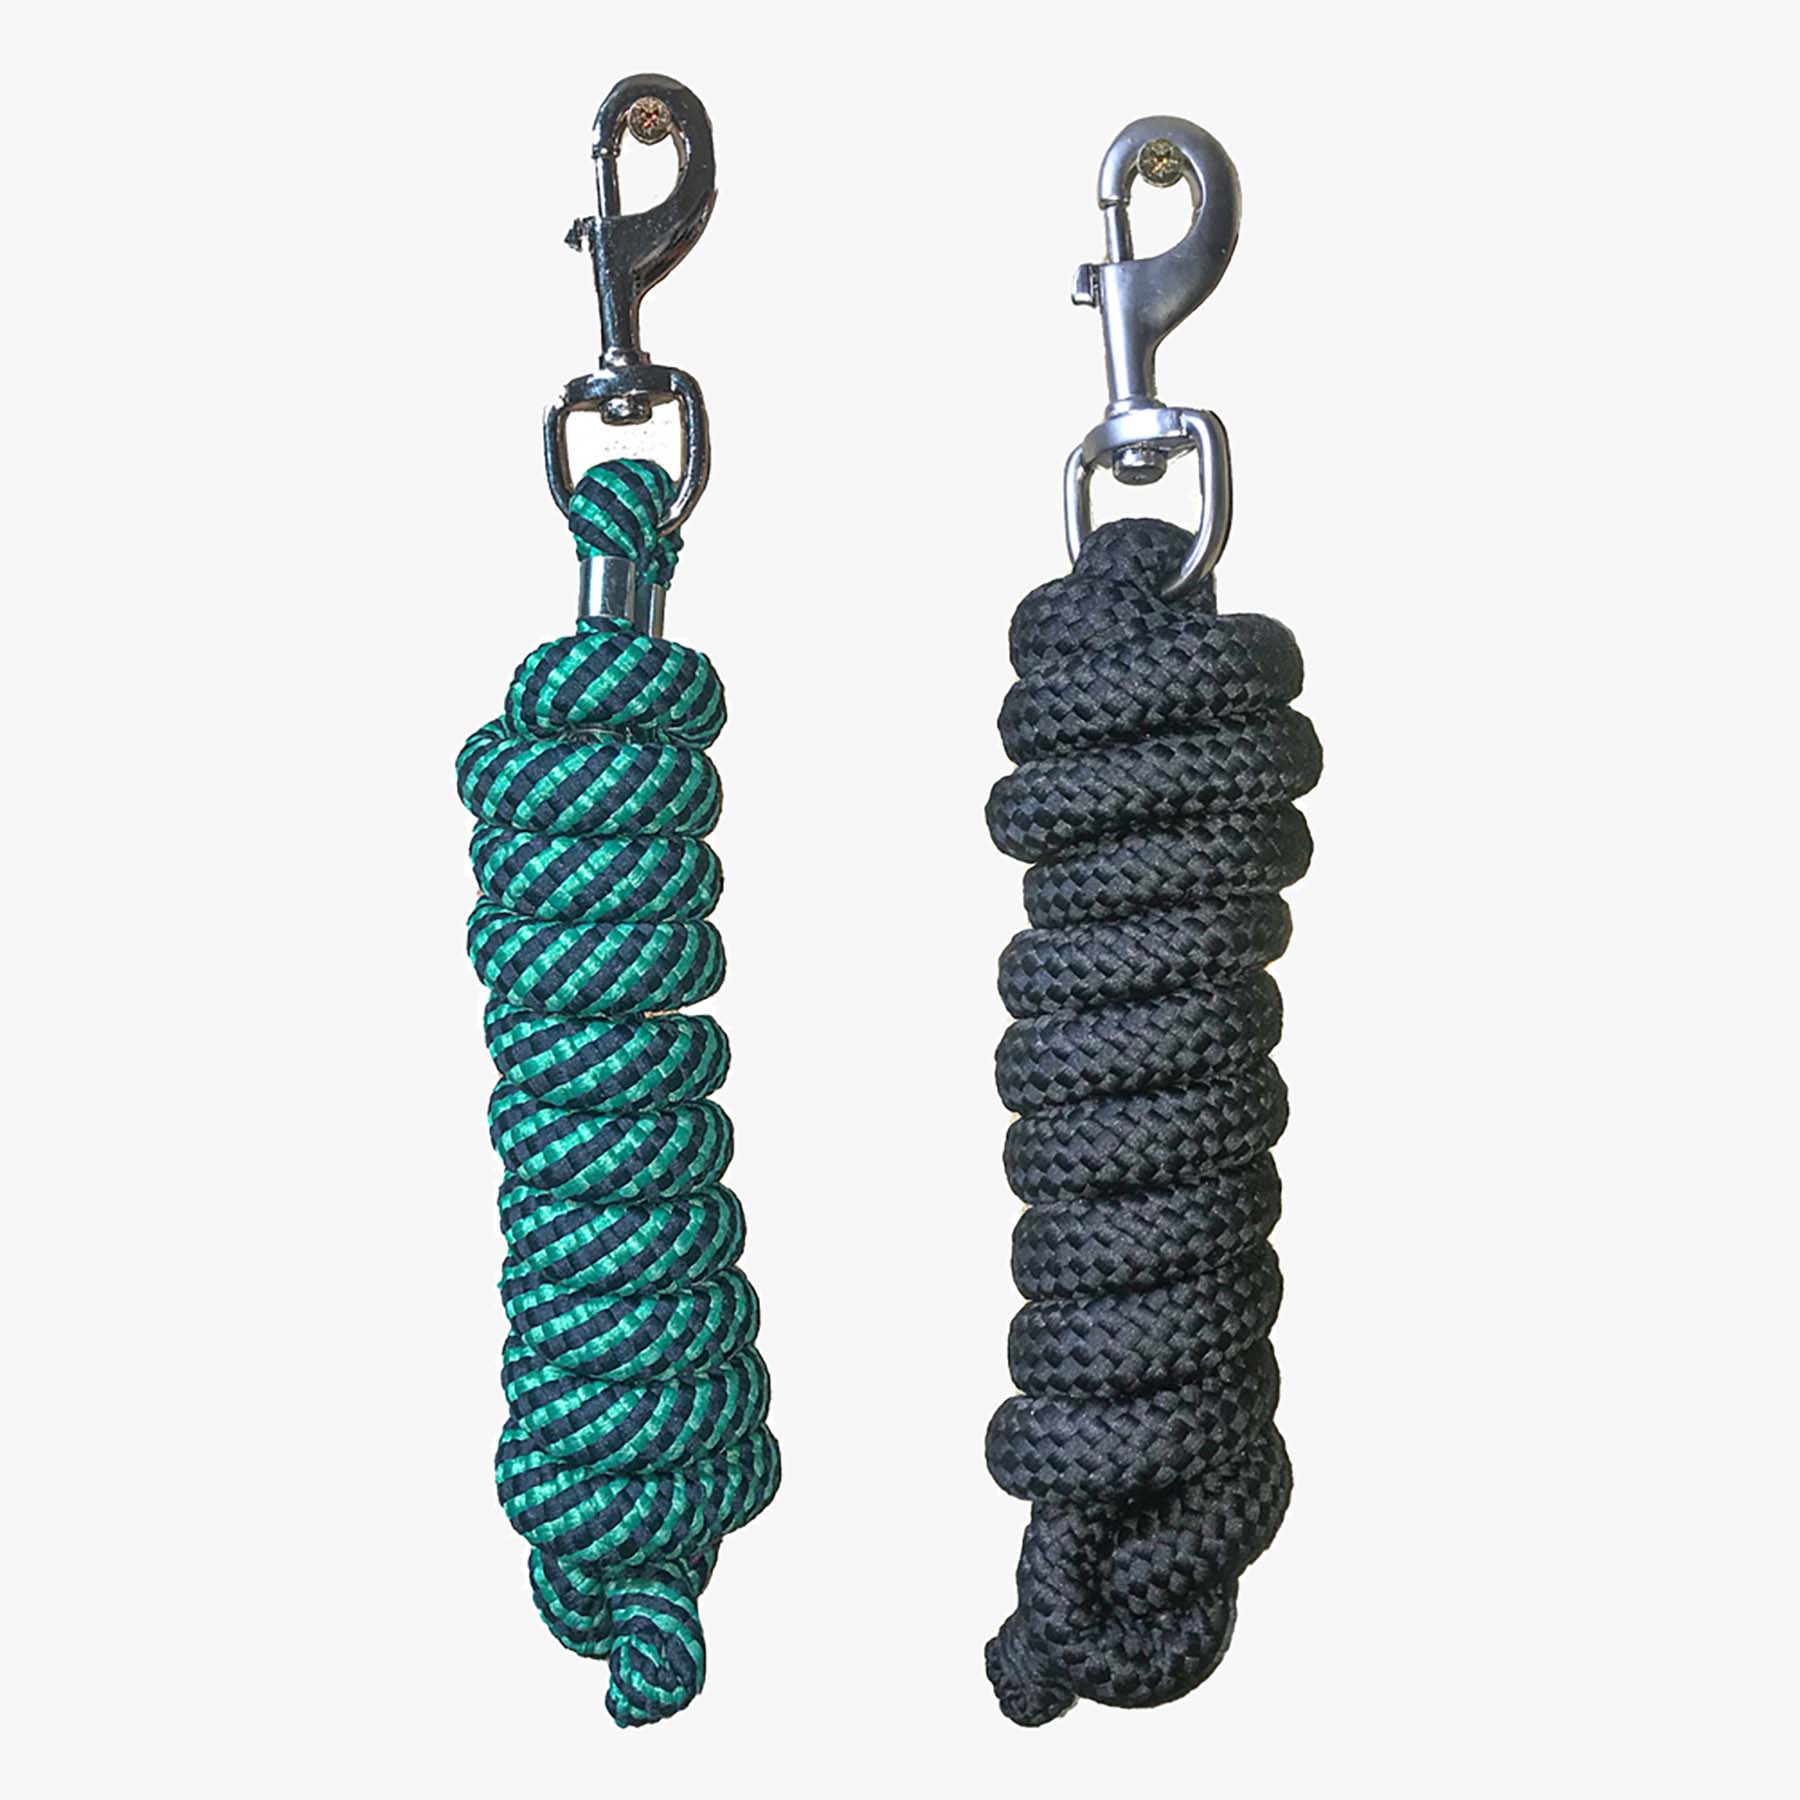 Cameo Equine Deluxe Leadrope in green and black, and plain black